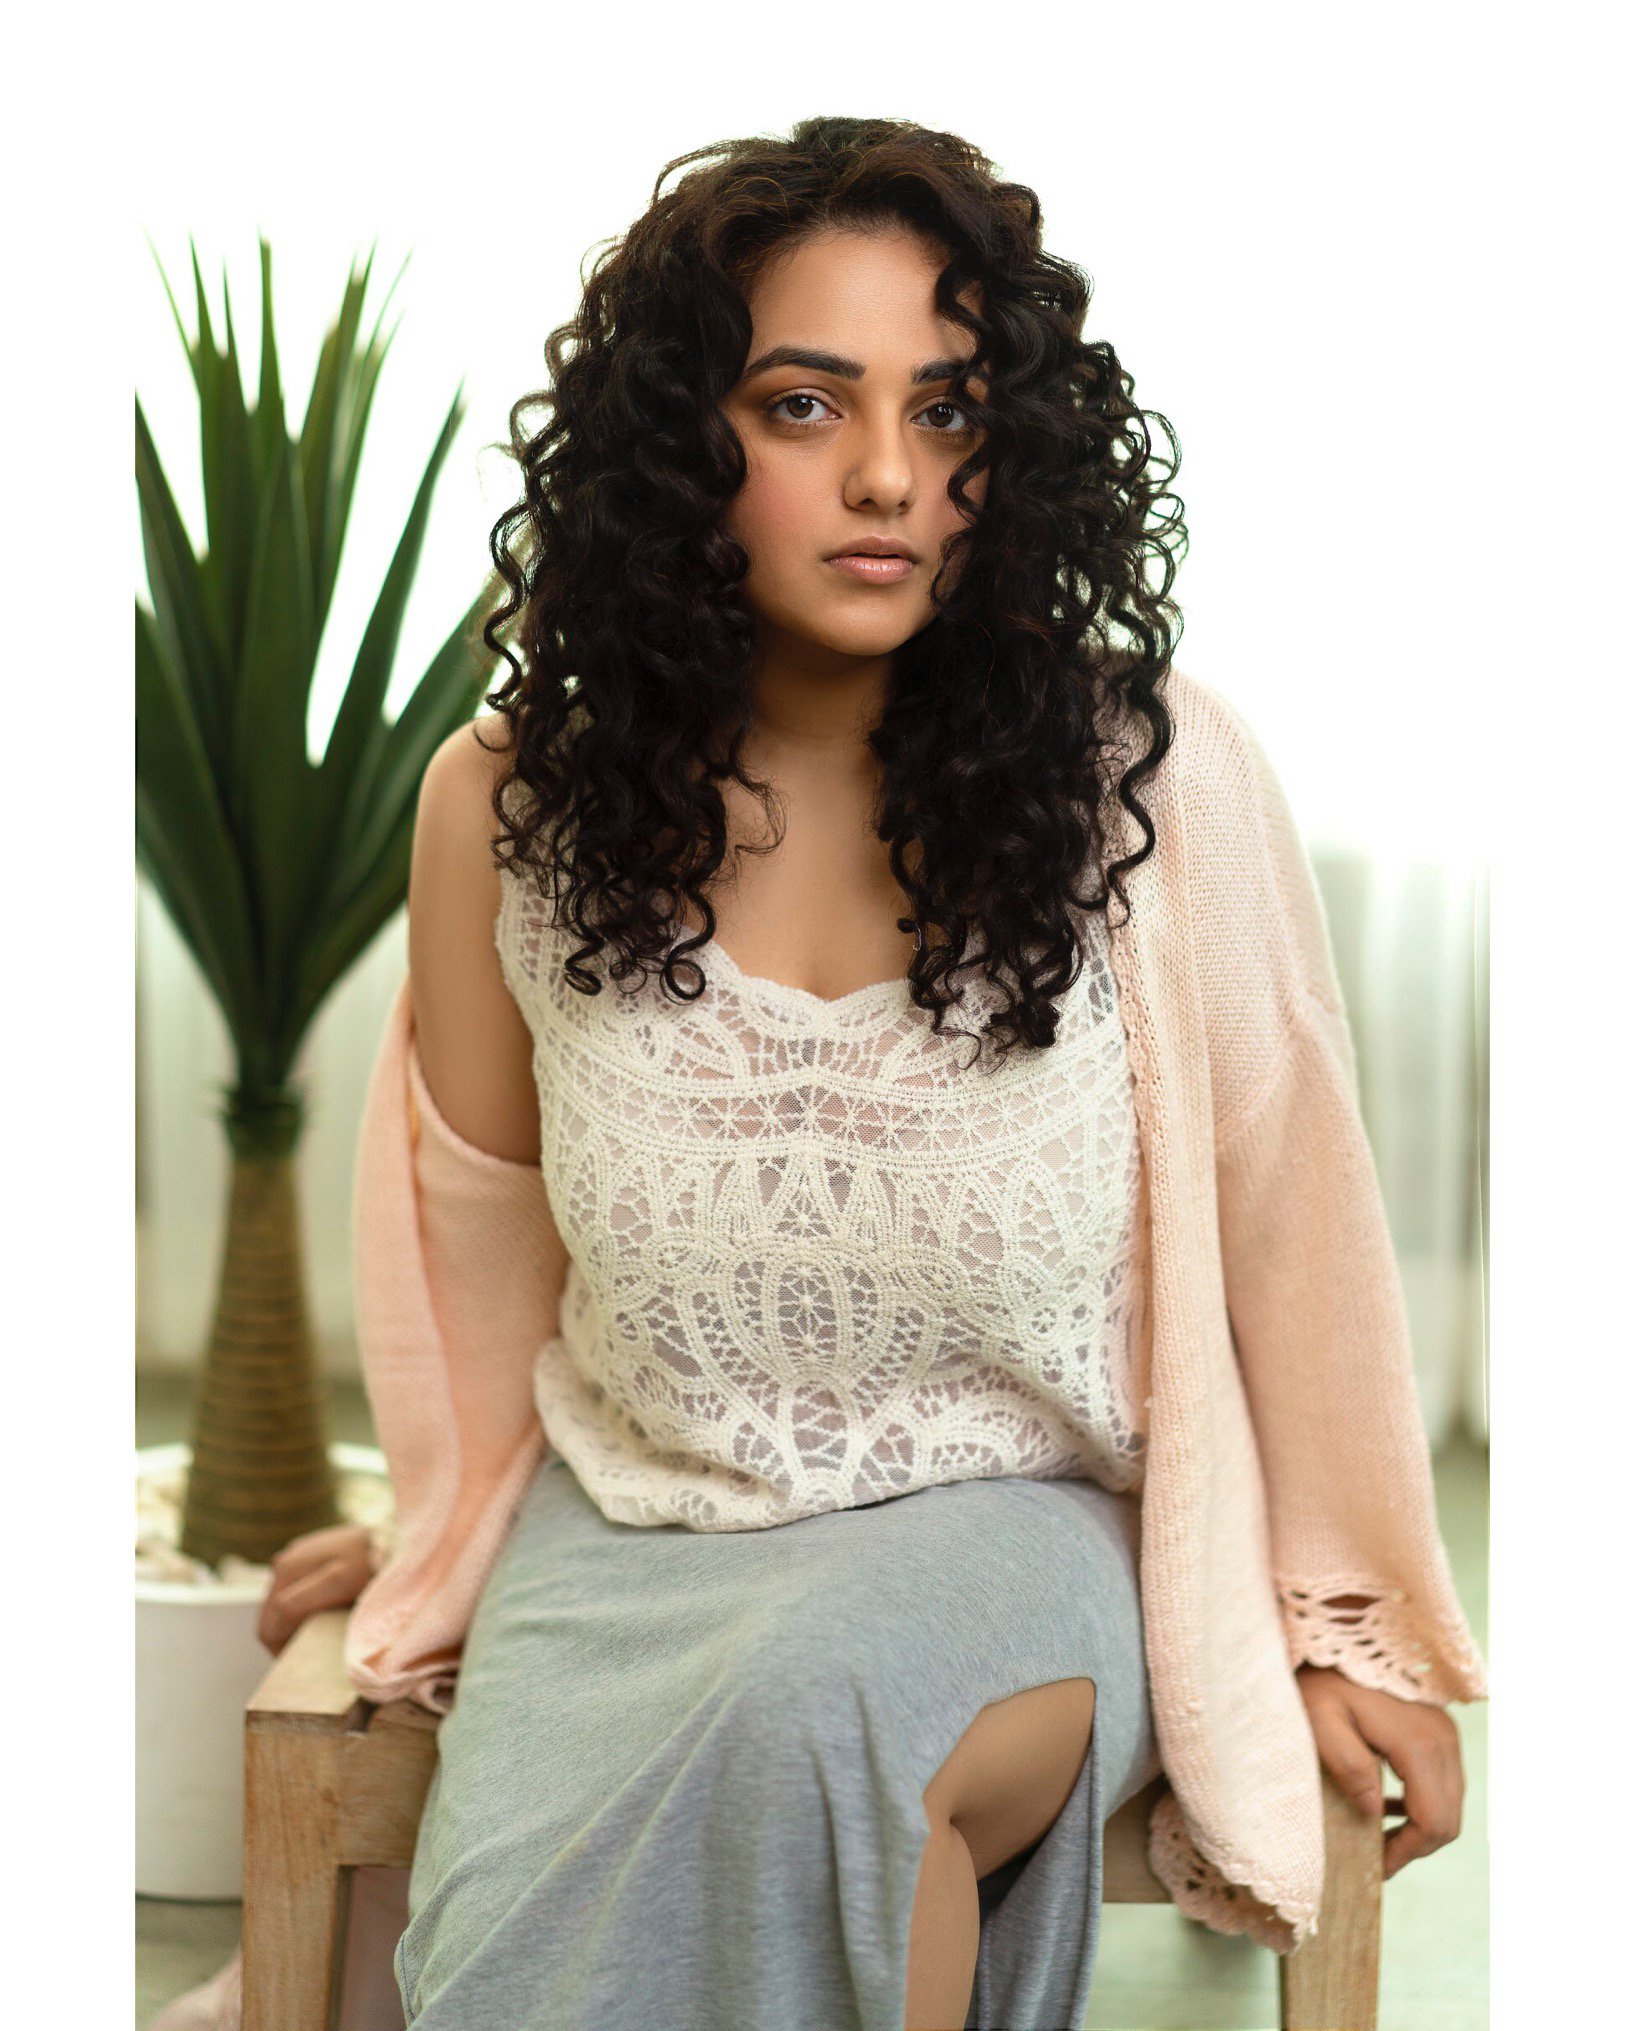 Never in a rush to go to Bollywood: Nithya Menen